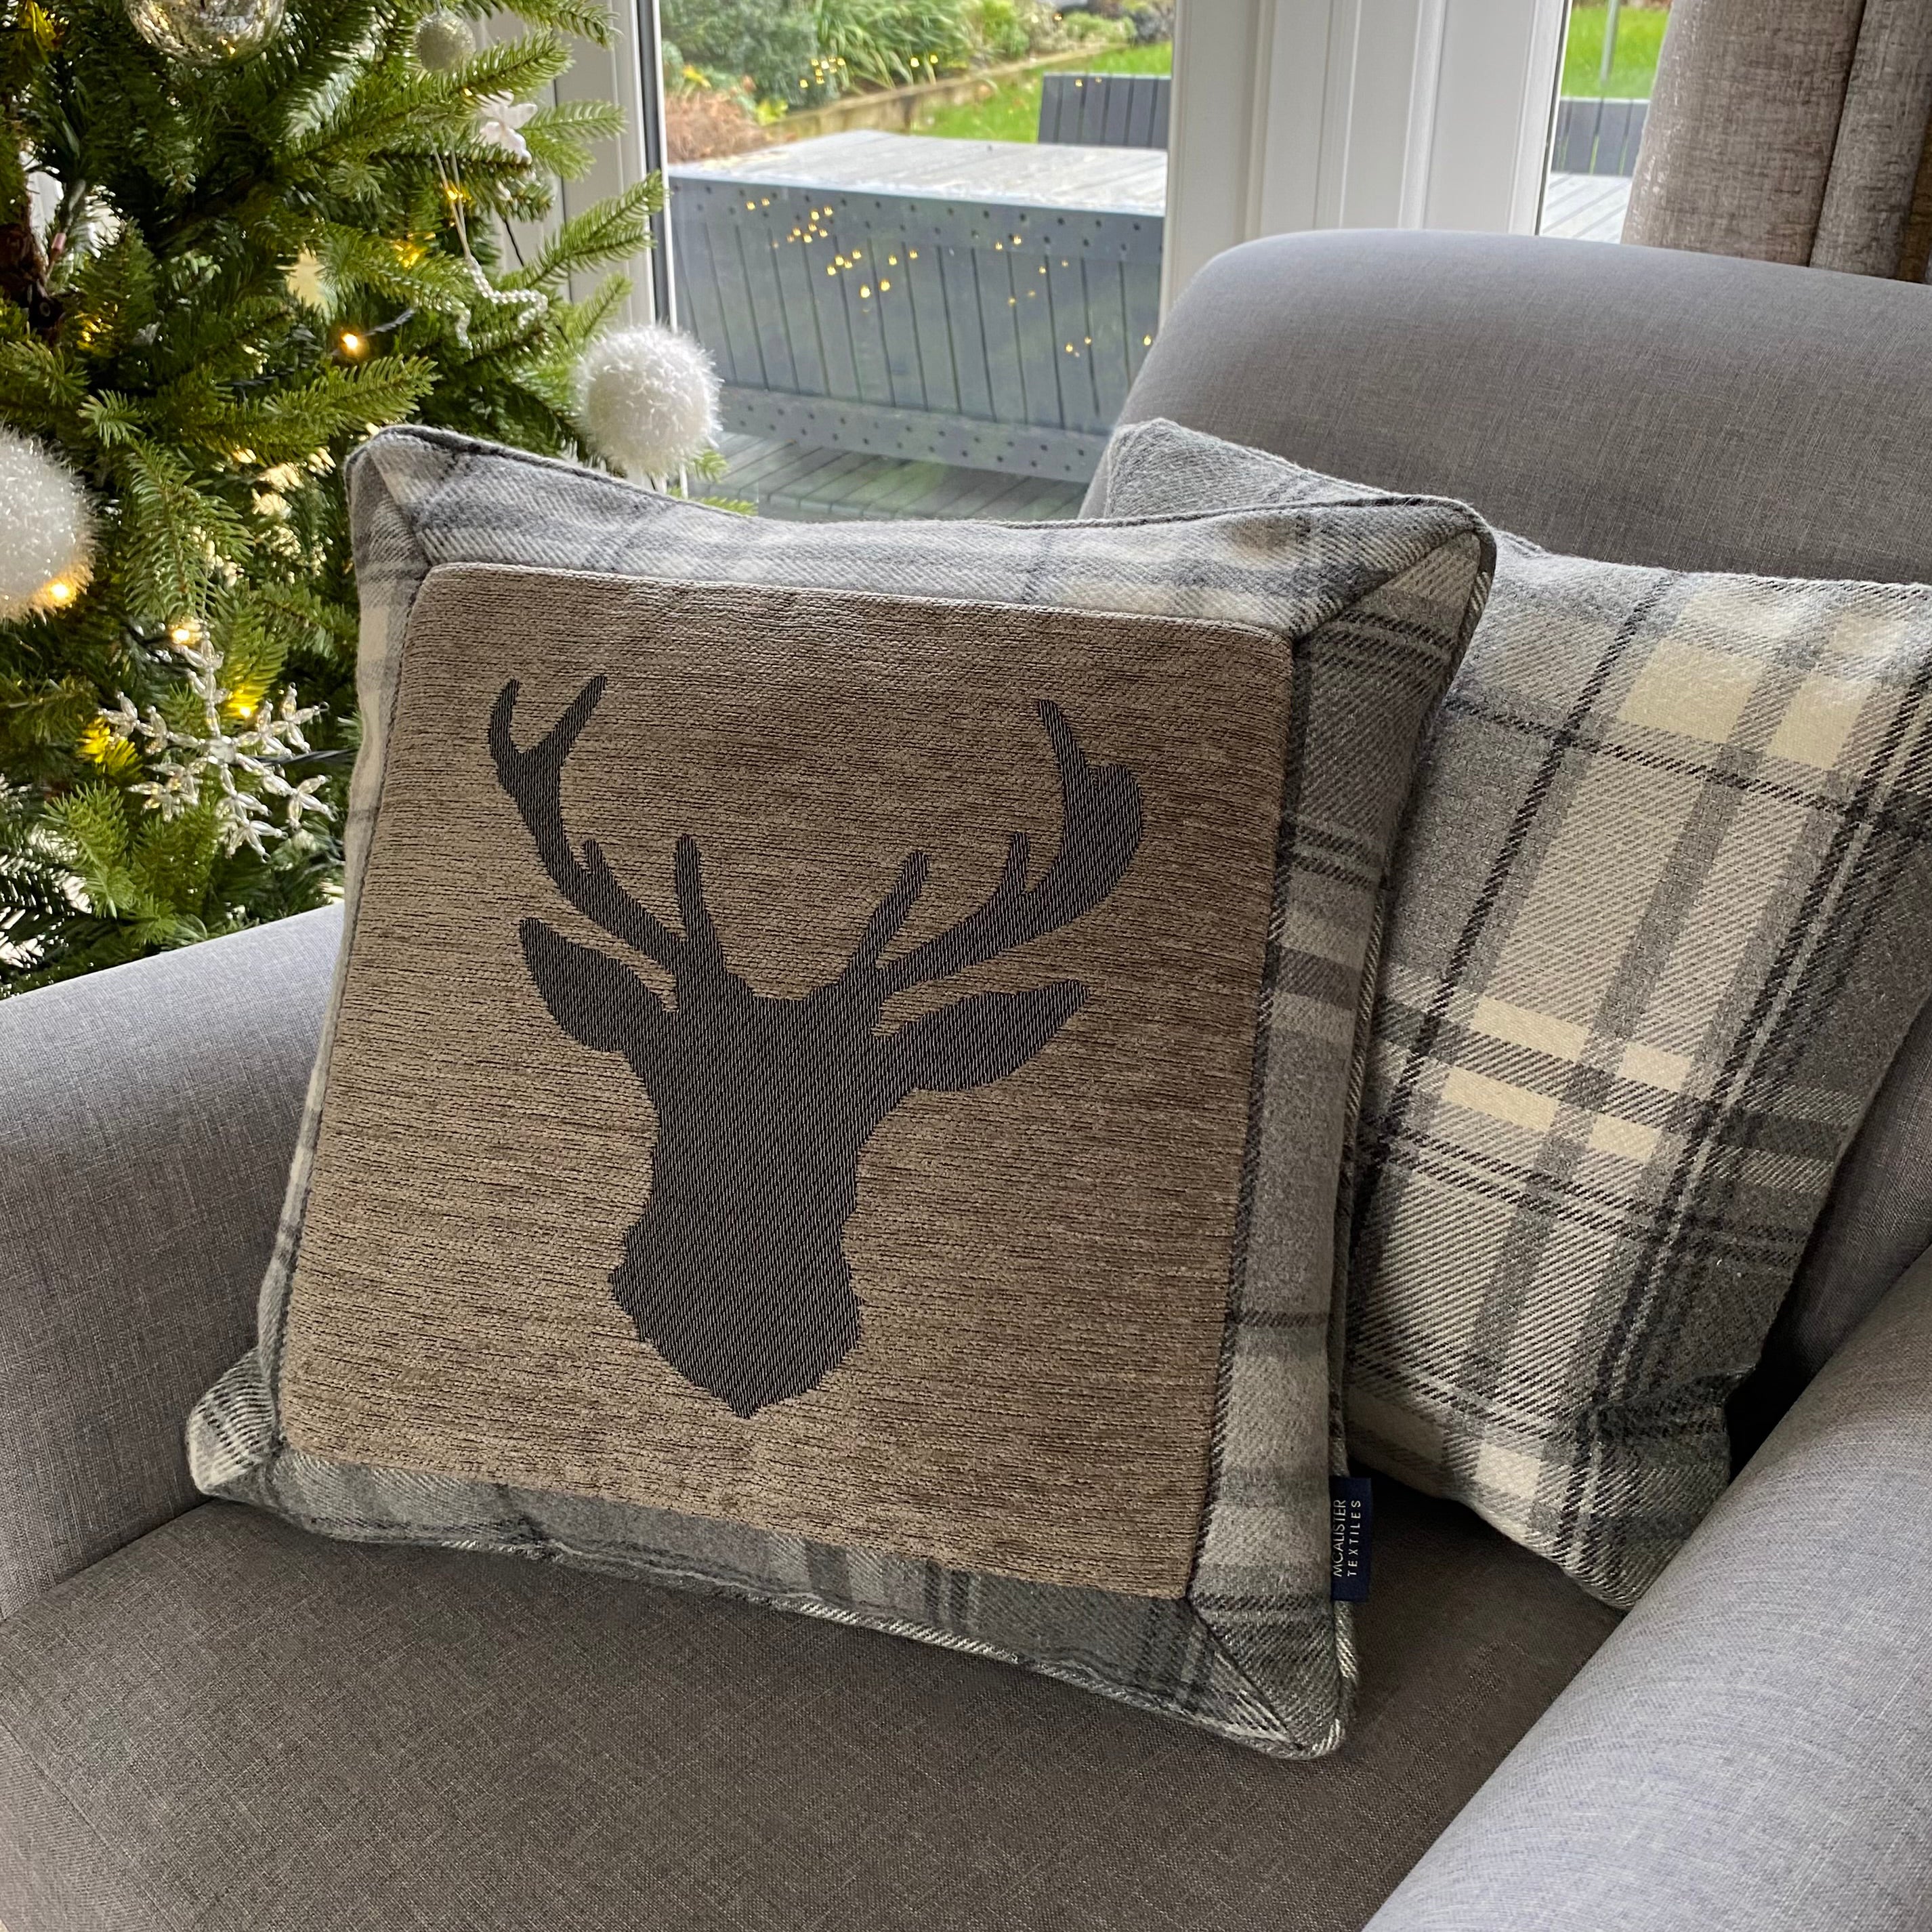 McAlister Textiles Stag Charcoal Grey Tartan 43cm x 43cm Cushion Set Cushions and Covers 